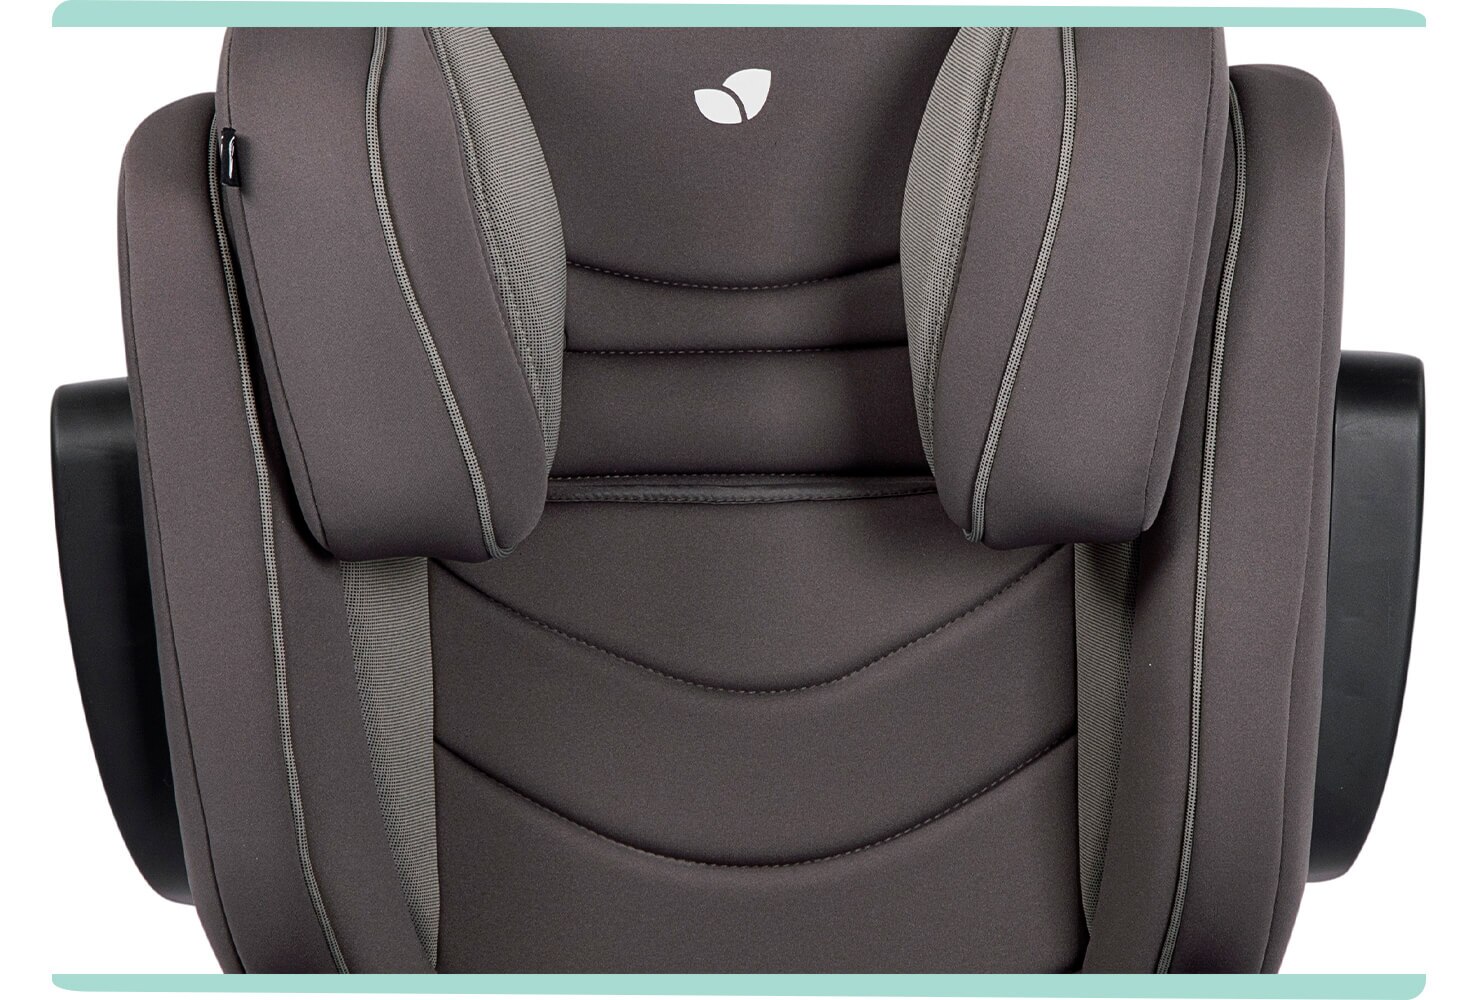  Zoomed in view of the headrest on the Joie trillo lx booster car seat.